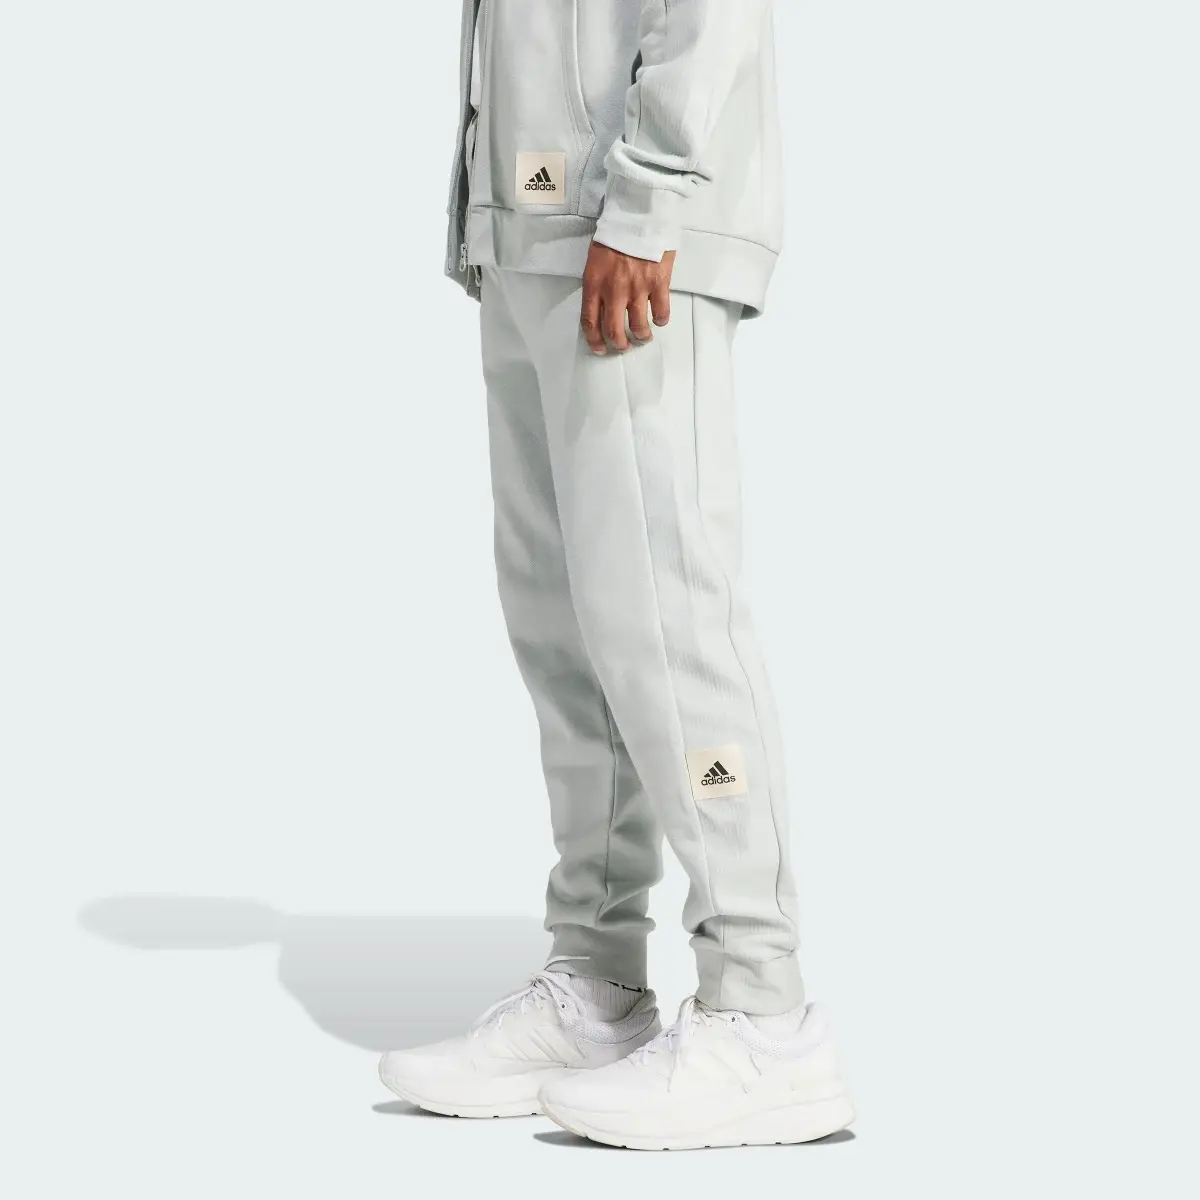 Adidas Lounge French Terry Pants. 2